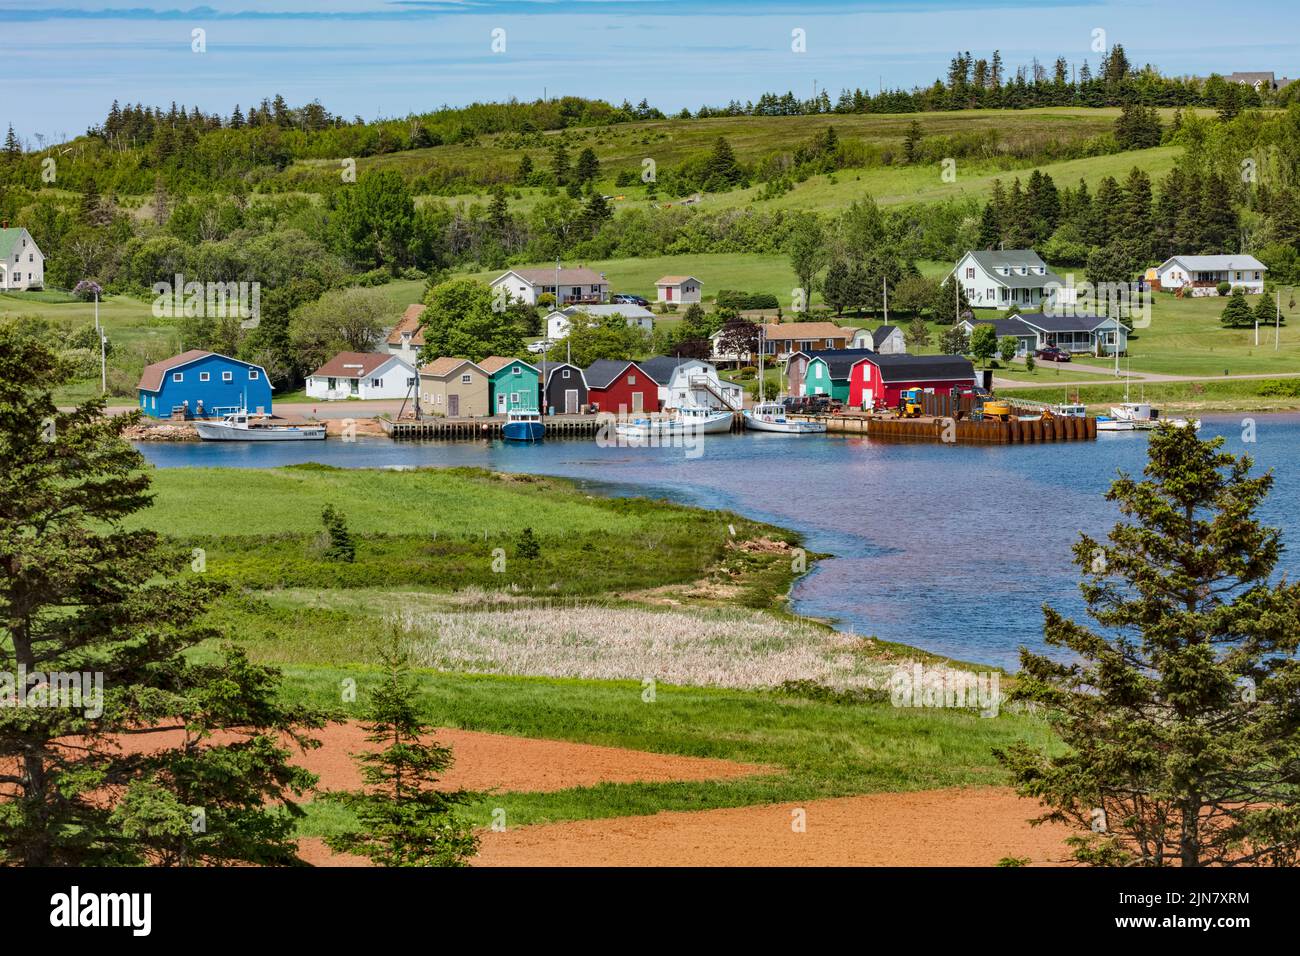 Where the fishing industry meets the farming industry at the village of French River. Stock Photo